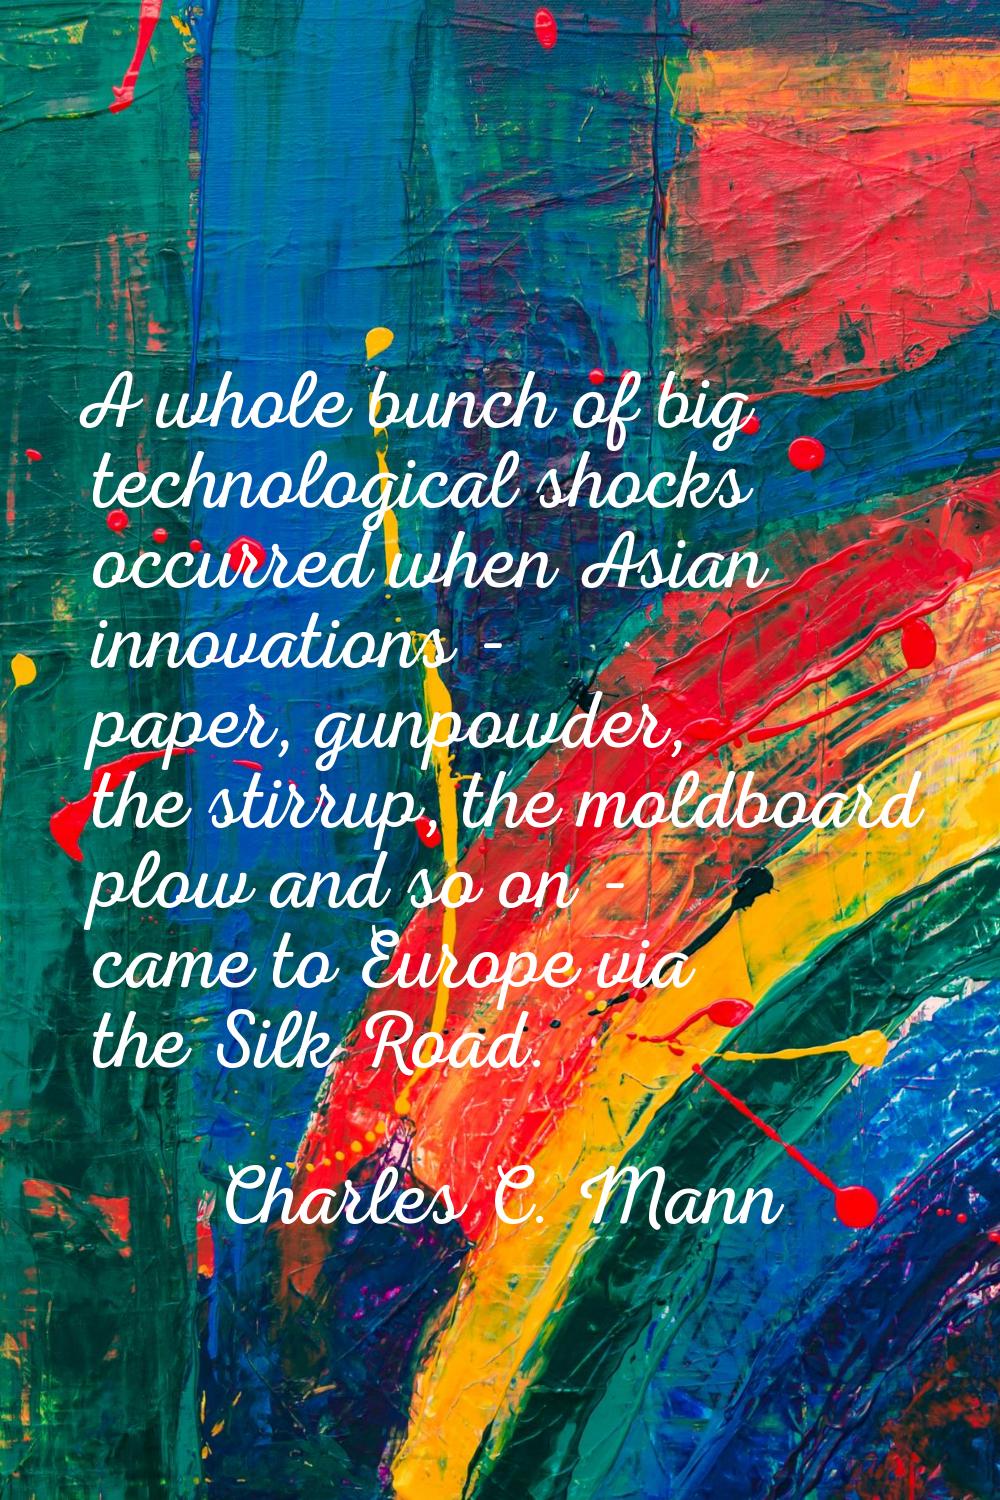 A whole bunch of big technological shocks occurred when Asian innovations - paper, gunpowder, the s